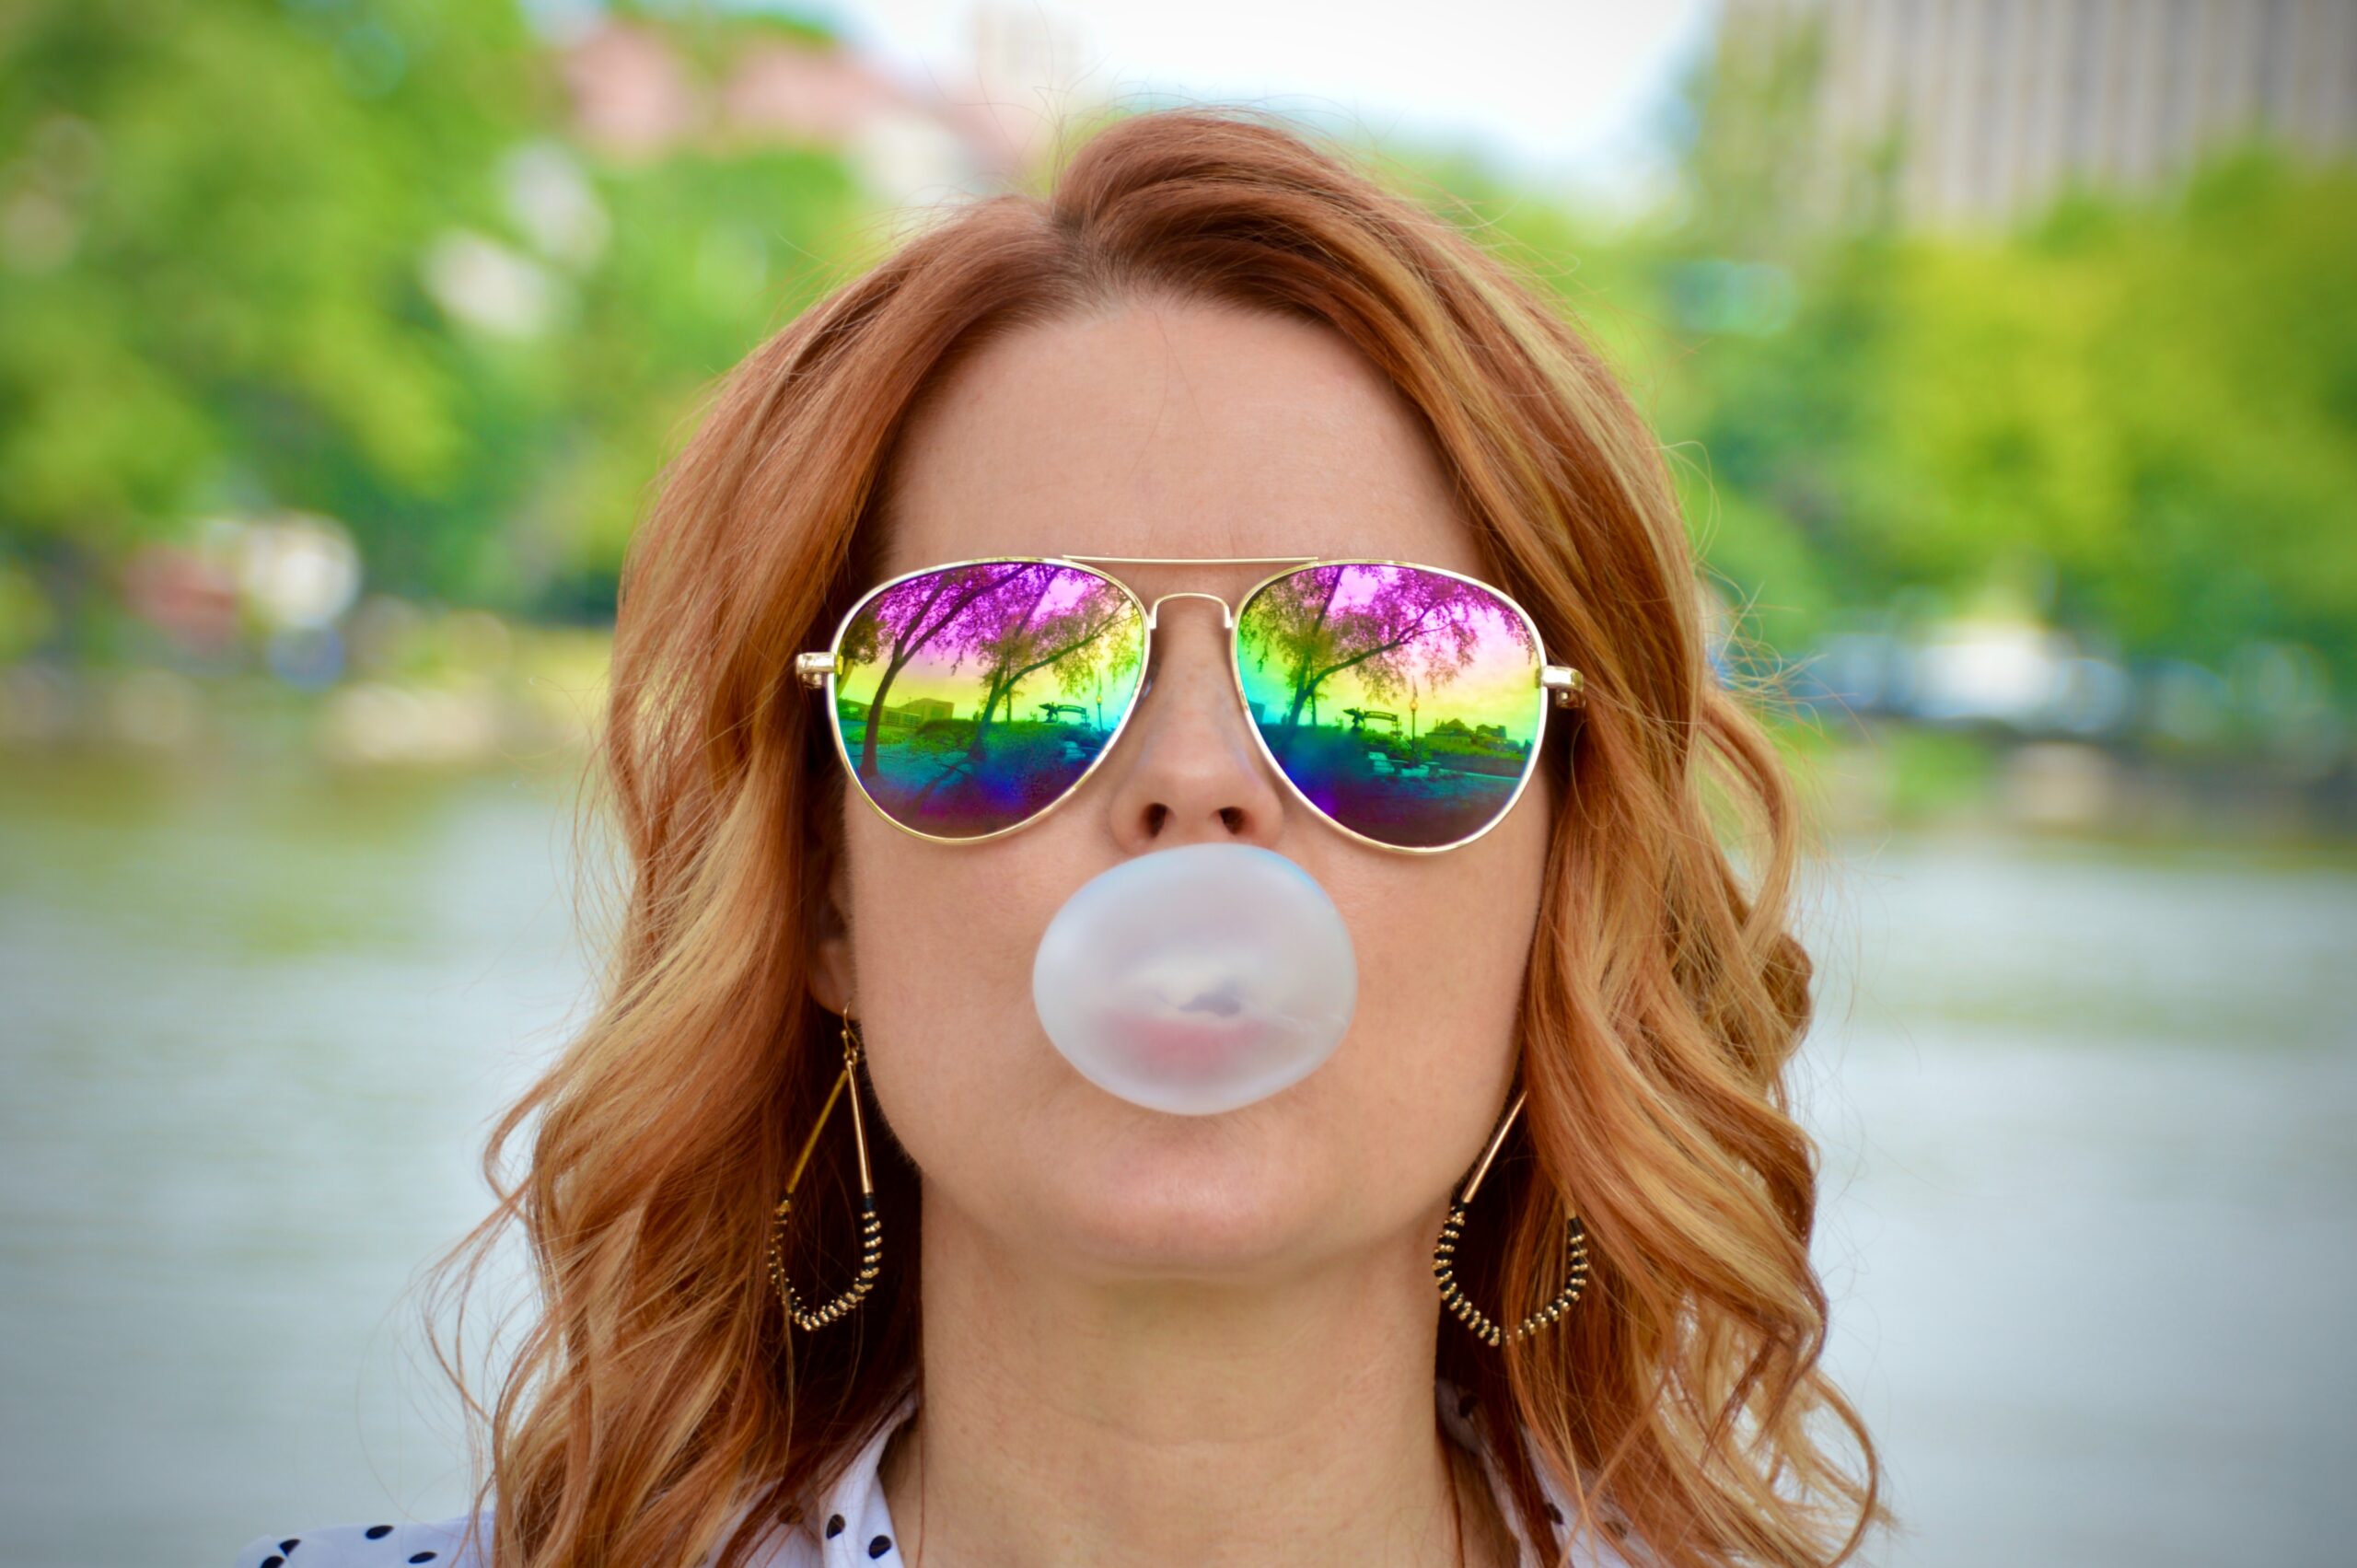 A woman wearing reflective sunglasses and blowing a bubble with bubblegum